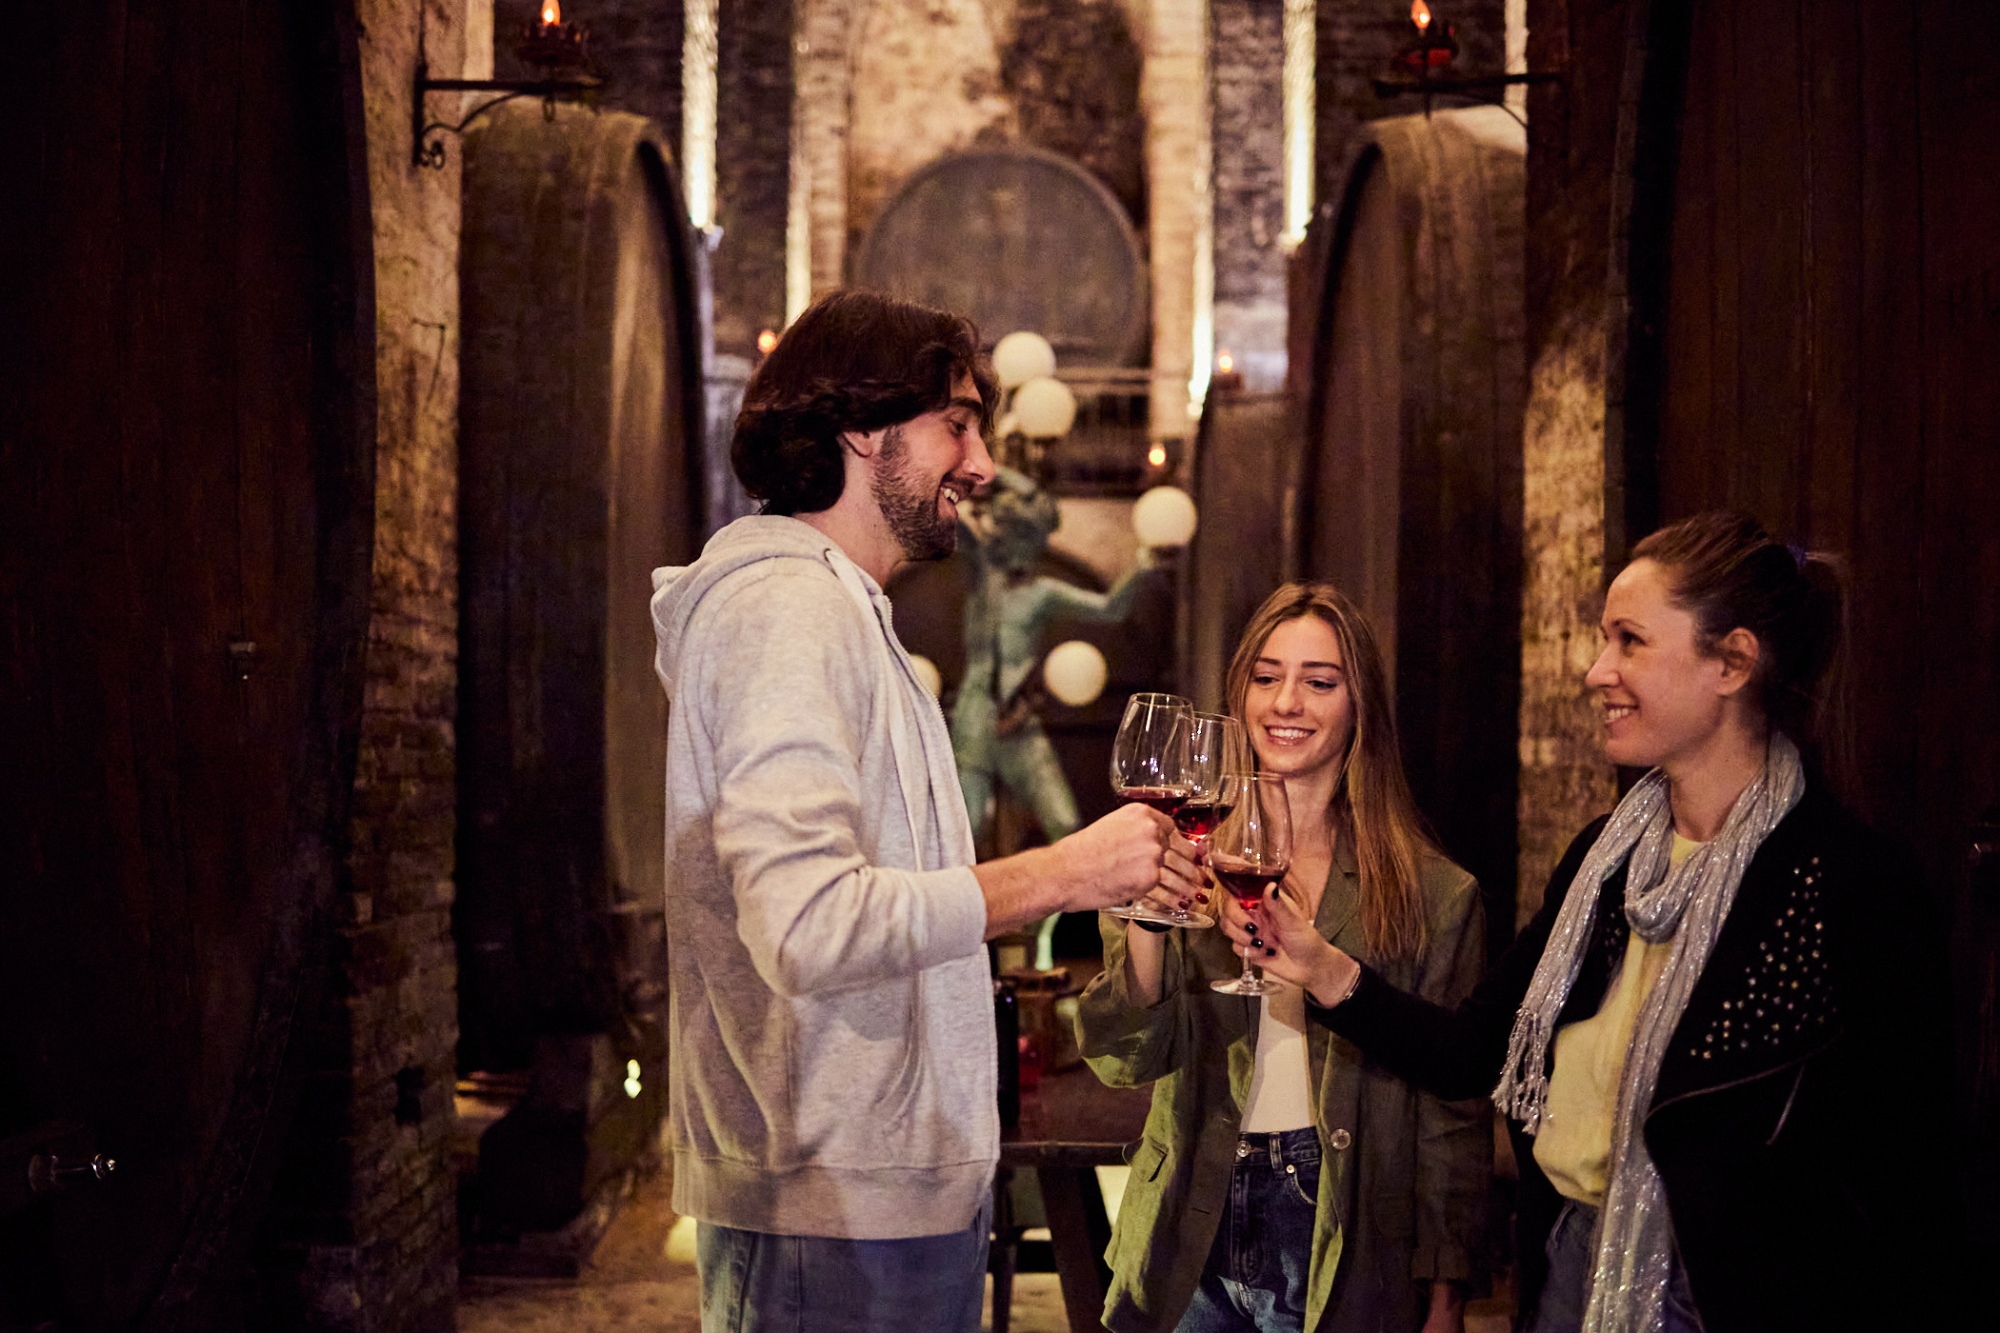 Wine lovers experience a Montepulciano